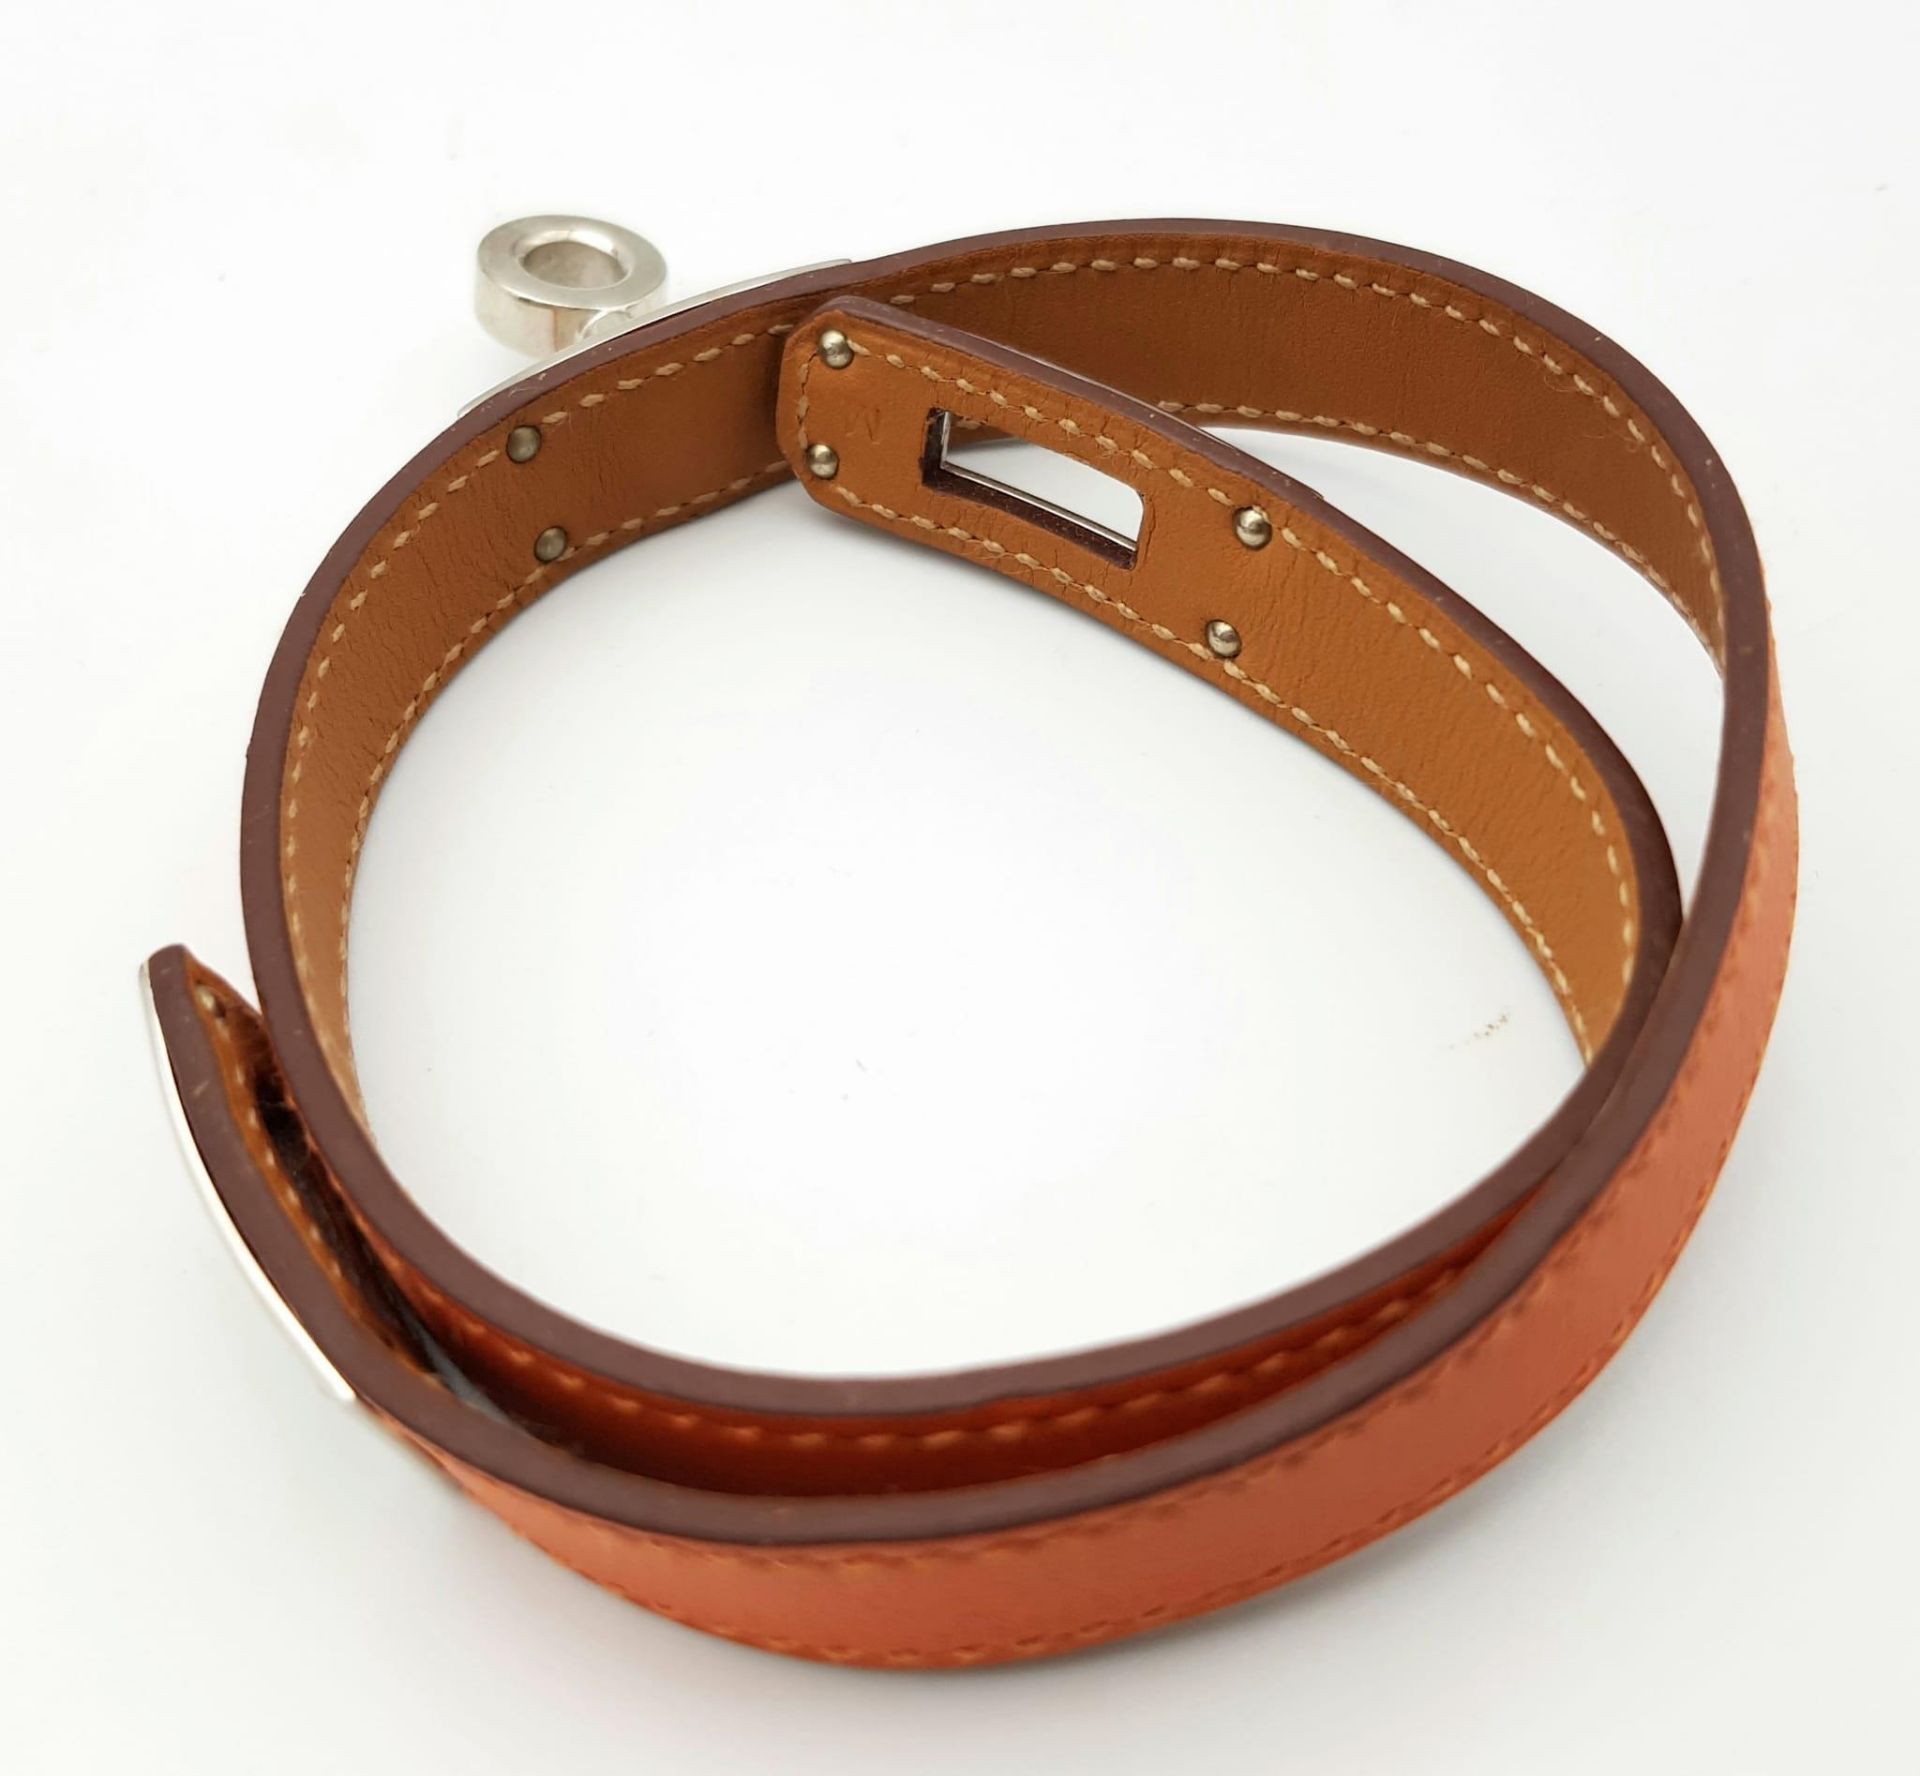 A Hermes Brown Bracelet with Silver Tone Hardware. 39cm. Ref: 016717 - Image 4 of 5